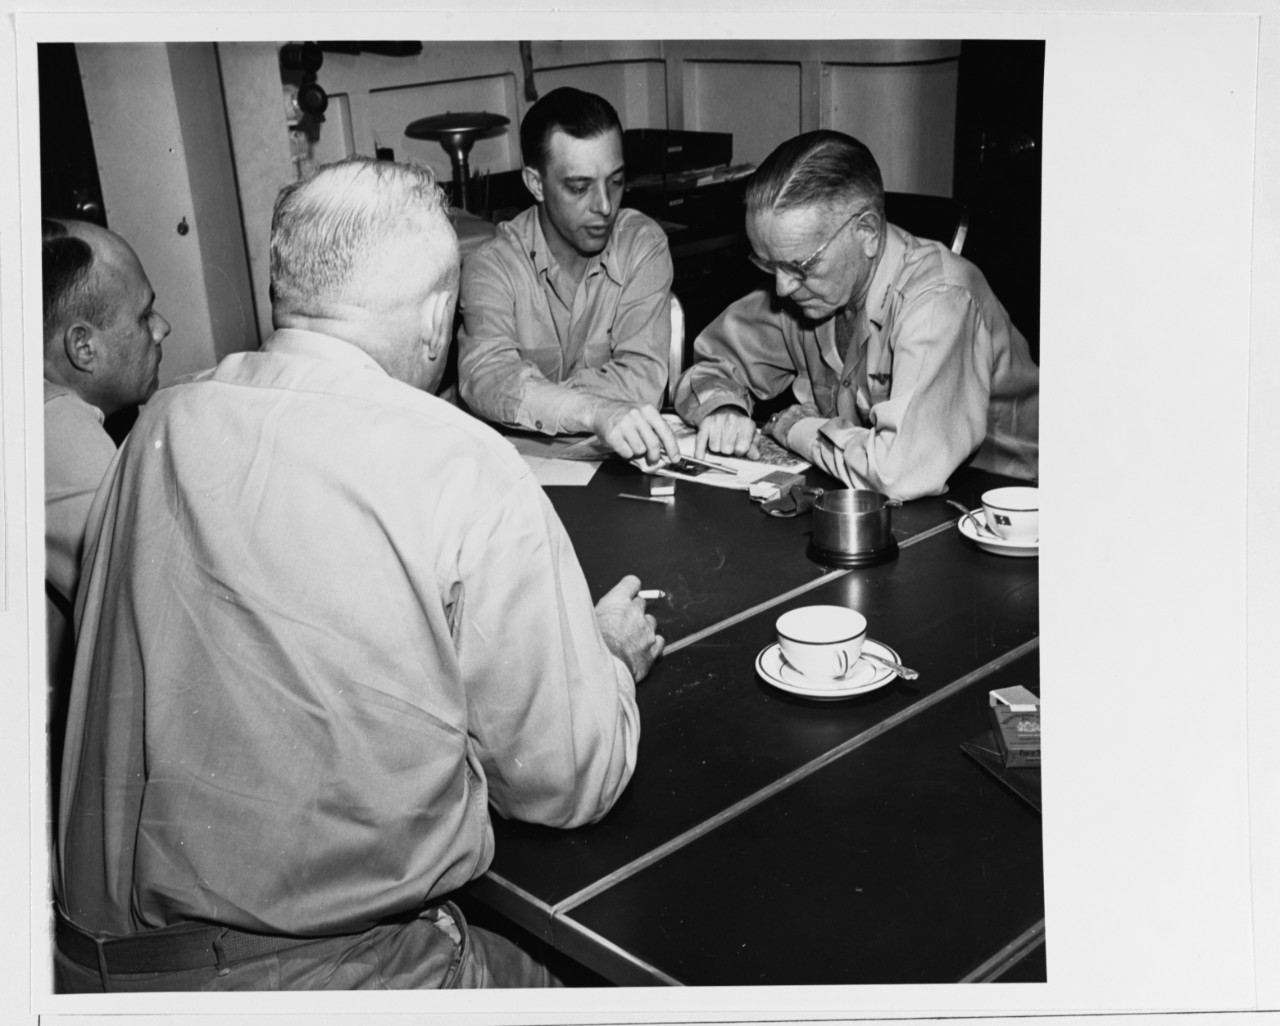 Admiral William F. Halsey, Commander Third Fleet, holds a conference with his staff members on board USS NEW JERSEY (BB-62)                                                                                                                                                                                                                                                                                                                                                        